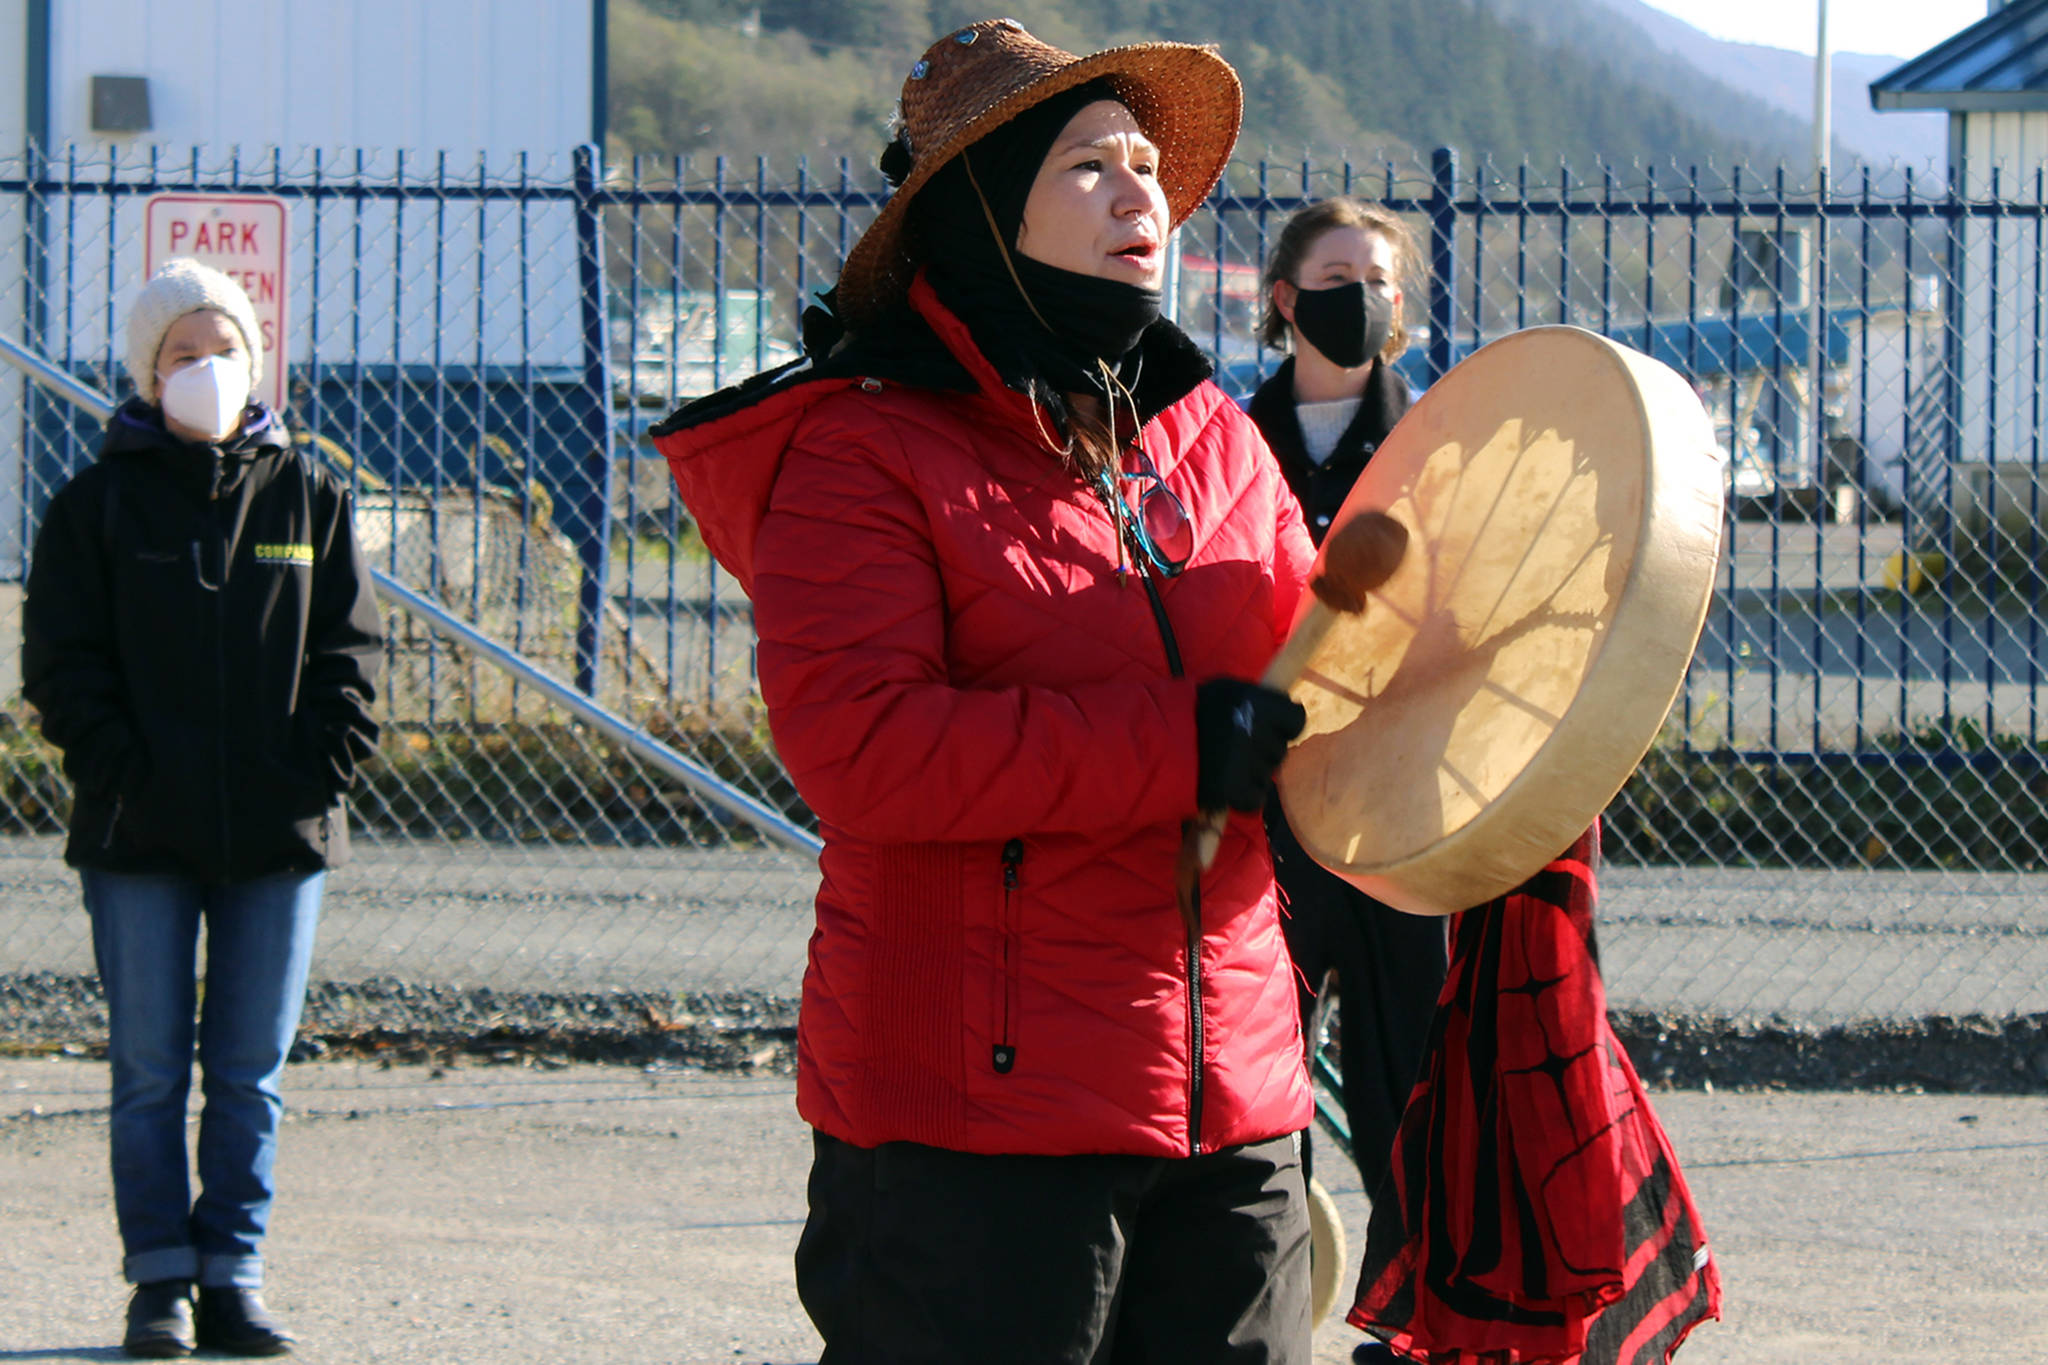 The march from the State Capitol to Mayor Bill Overstreet Park pauses for drumming and song on Saturday, Oct. 17. (Ben Hohenstatt / Juneau Empire) The march from the State Capitol to Mayor Bill Overstreet Park pauses for drumming and song on Saturday, Oct. 17. (Ben Hohenstatt / Juneau Empire)